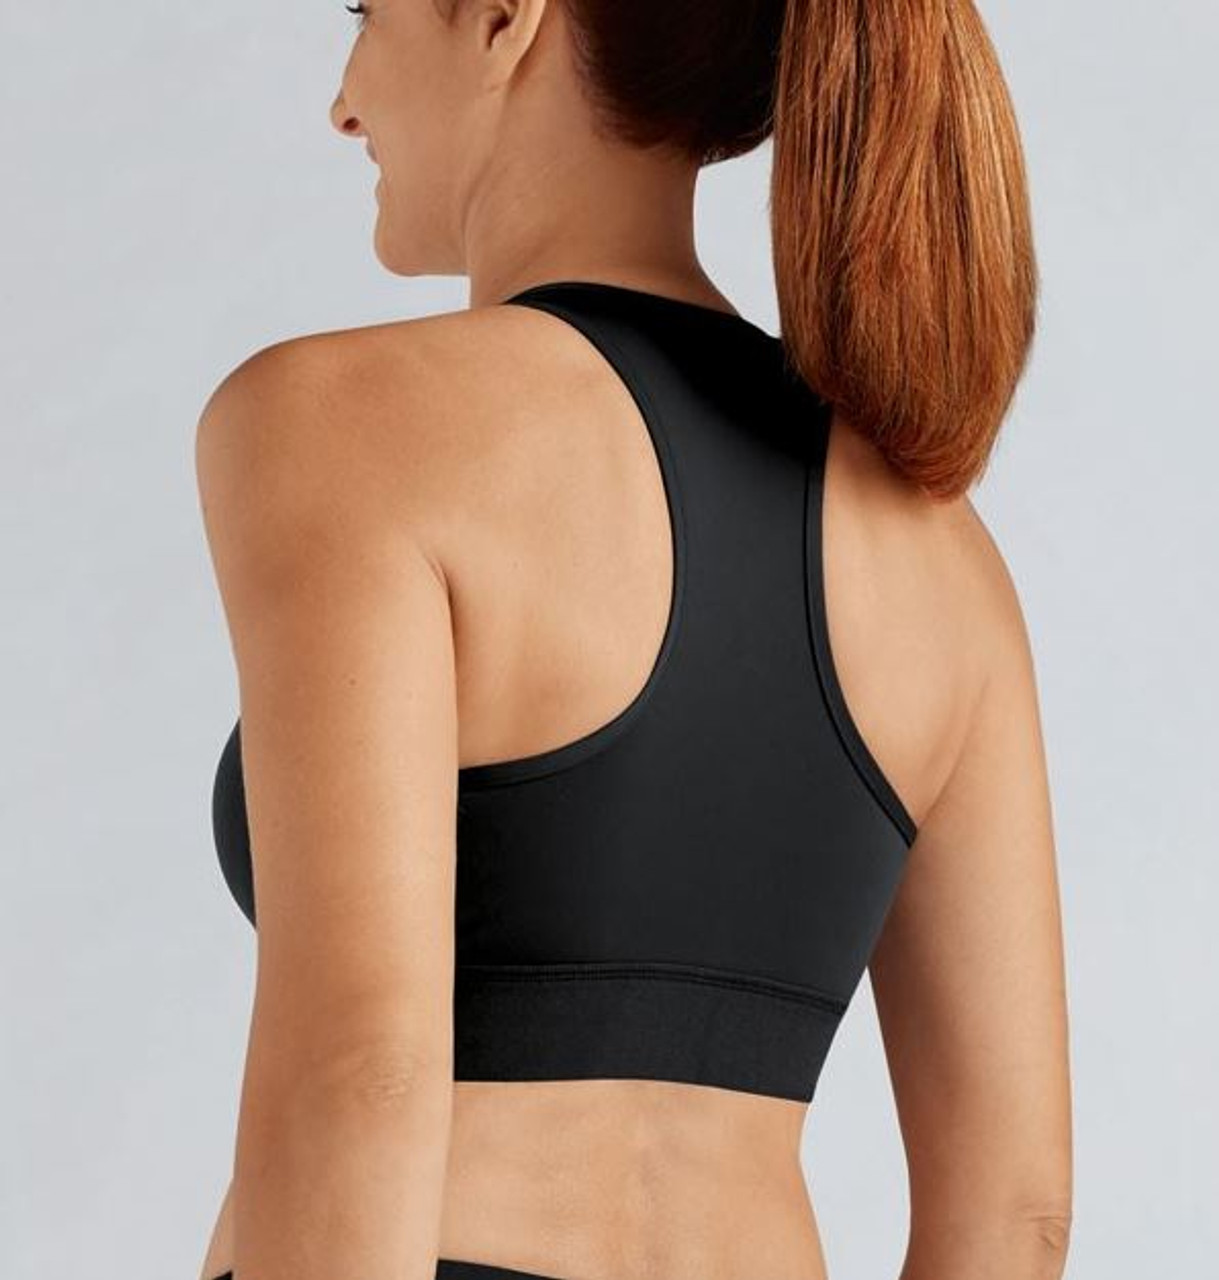 Amoena Mastectomy Bra- a Front Zipper Sports Bra after Breast Surgery